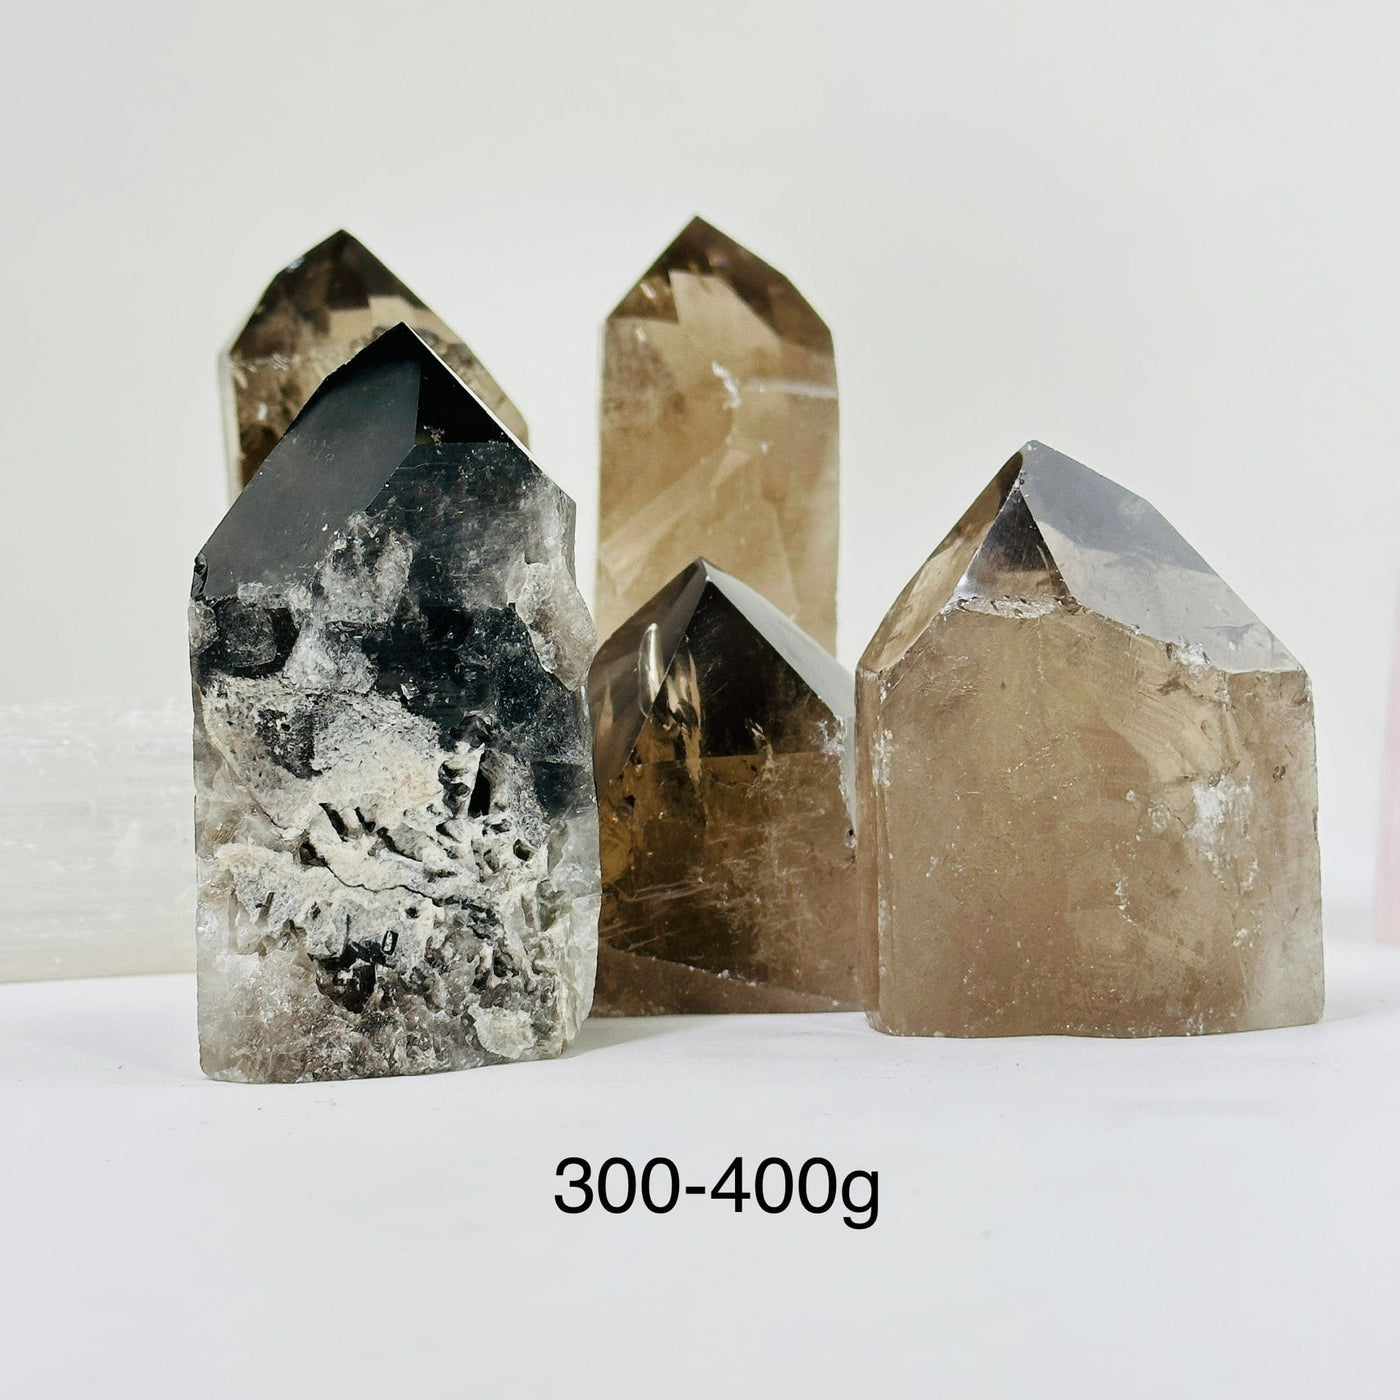 300-400g smoky quartz semi polished point with decorations in the background